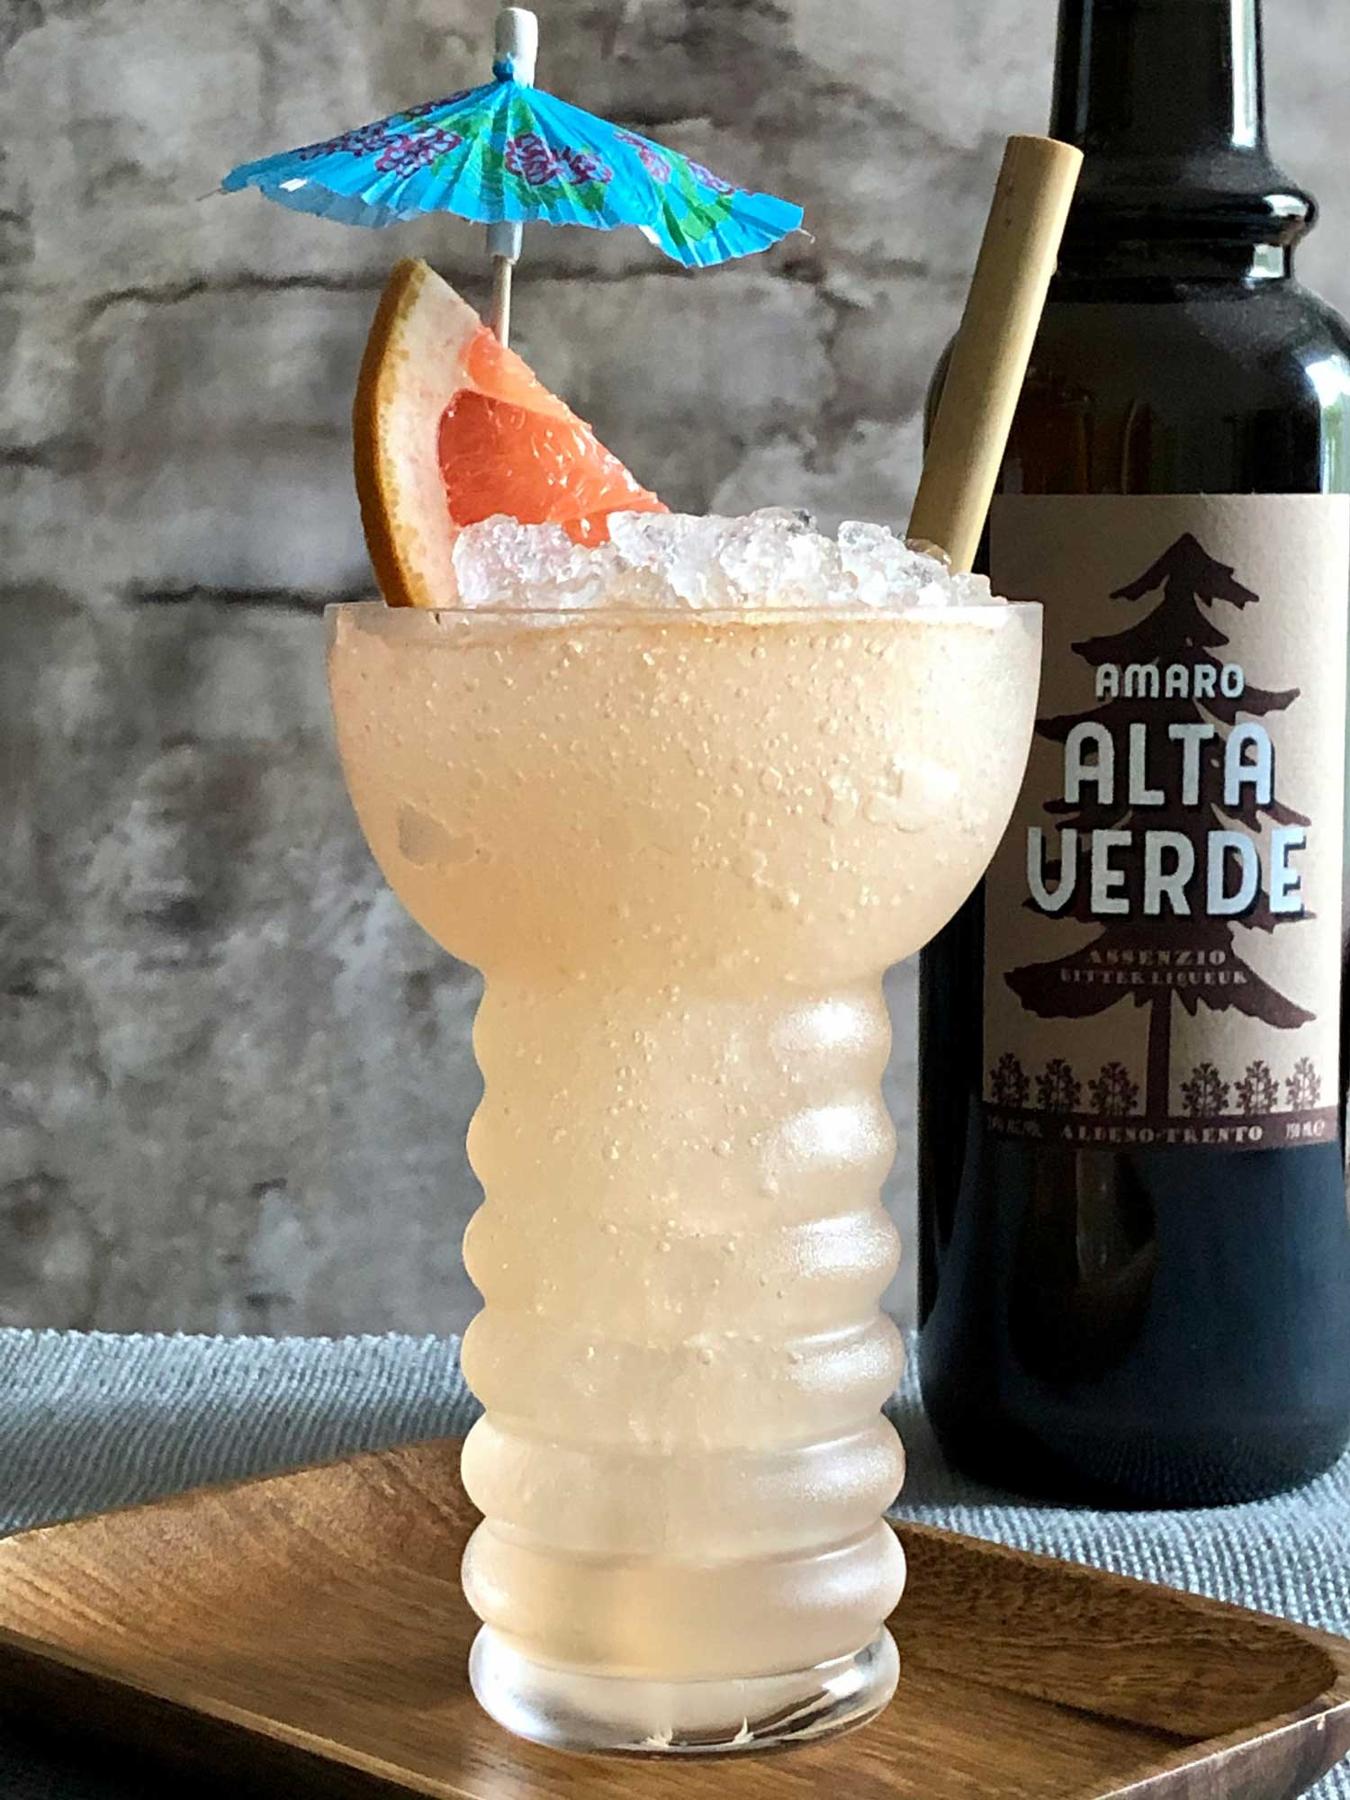 An example of the Land Ahoy, the mixed drink (drink), by Based on a drink by Rob Ficks, The Hawthorne, Boston, MA, featuring Hayman’s Old Tom Gin, grapefruit juice, John D. Taylor’s Velvet Falernum, Amaro Alta Verde, vanilla syrup, and crushed ice; photo by Lee Edwards